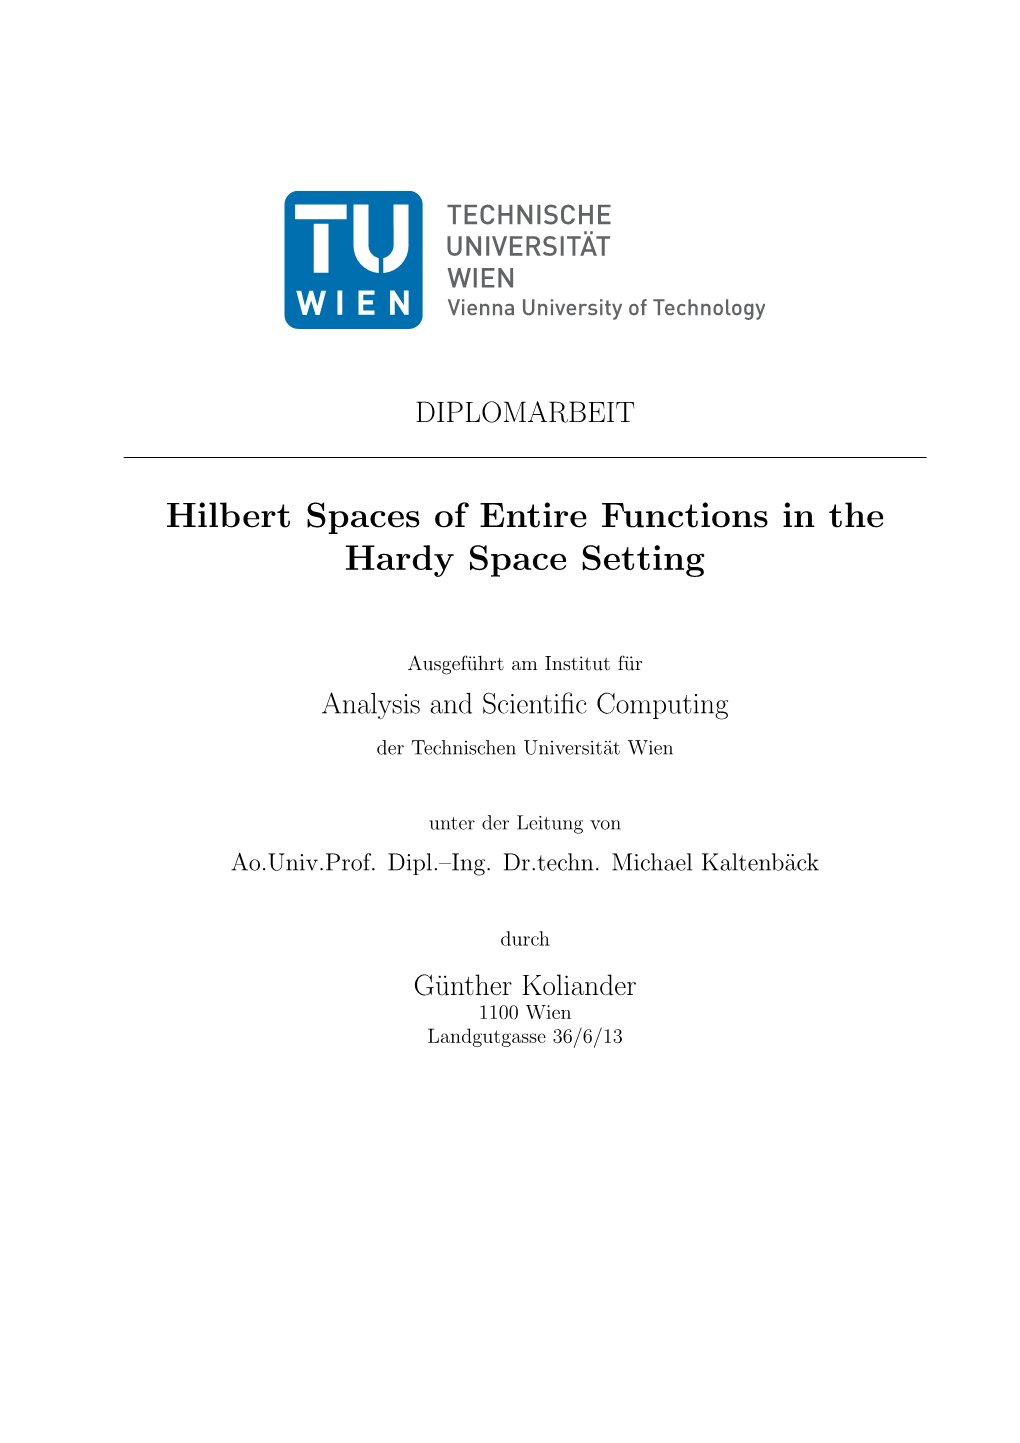 Hilbert Spaces of Entire Functions in the Hardy Space Setting